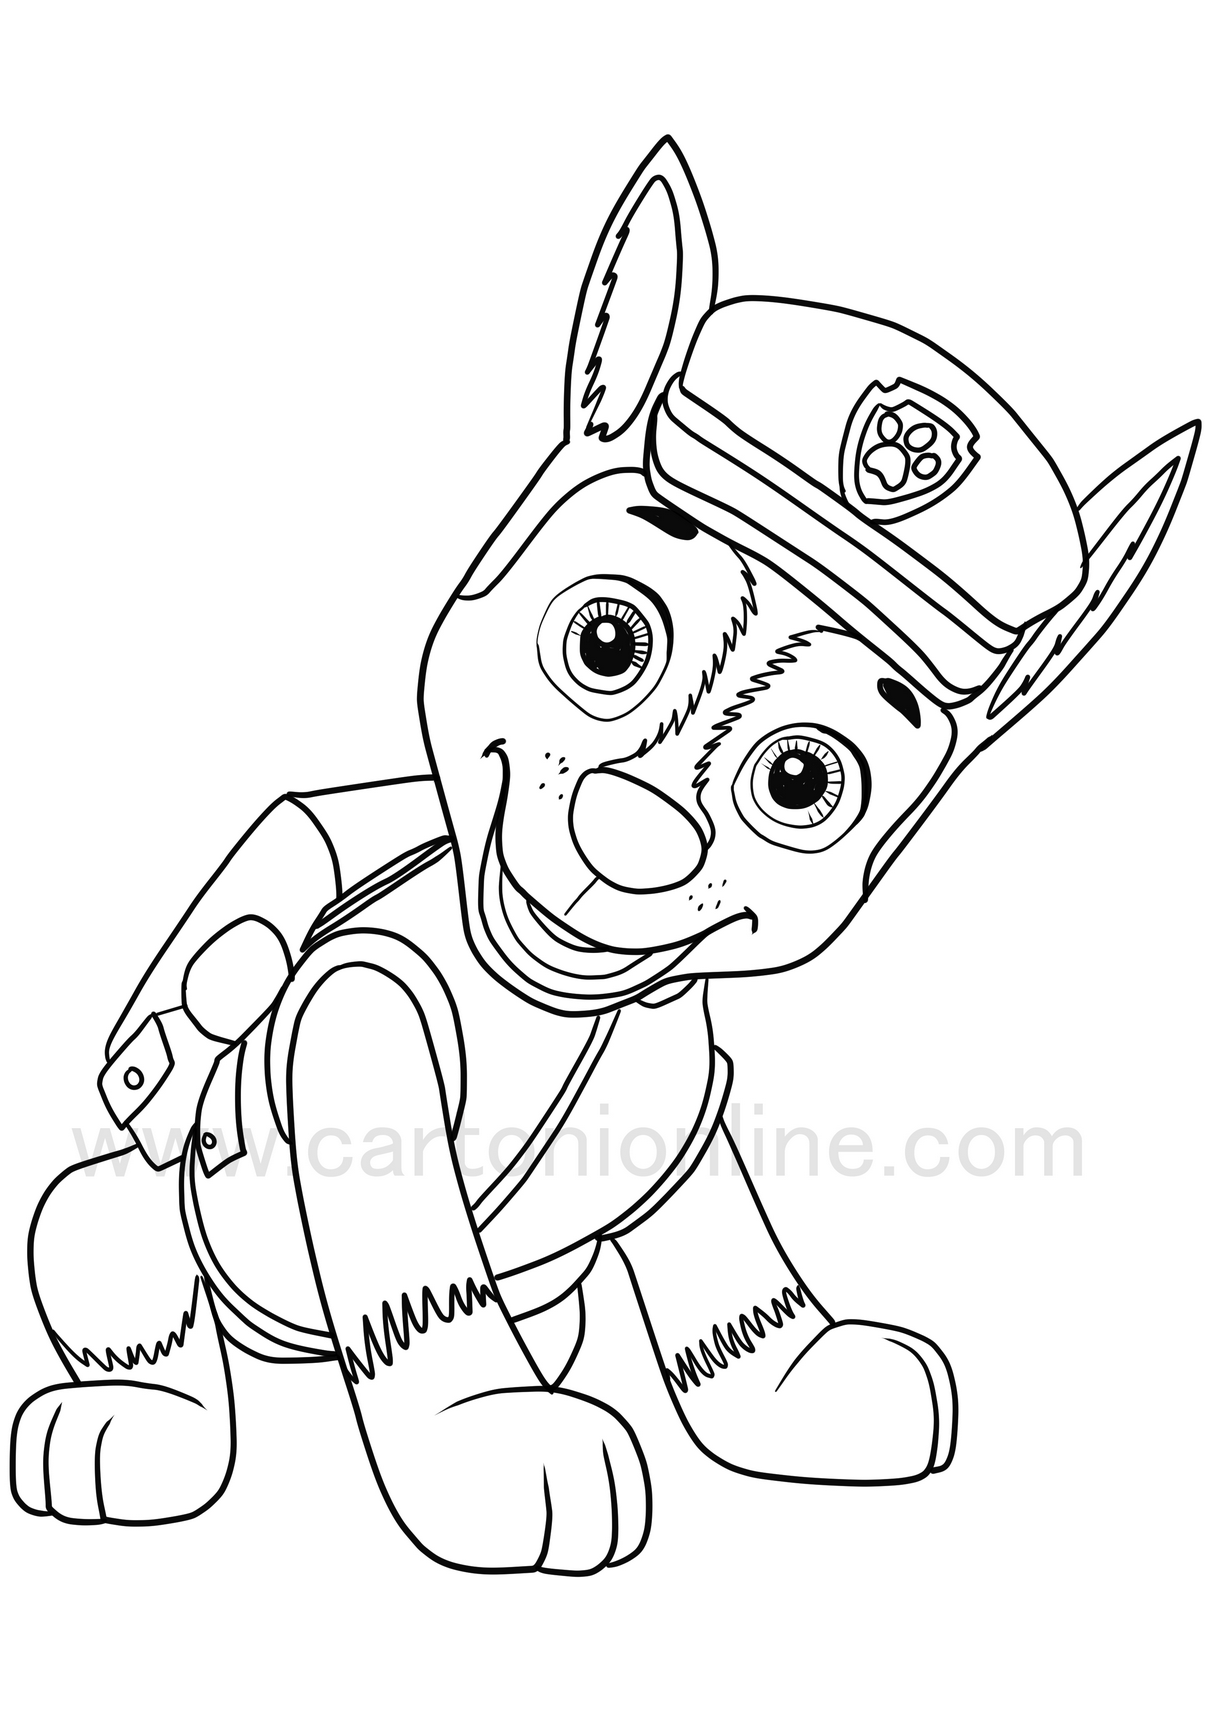 Coloring pages of Chase from Paw Patrol